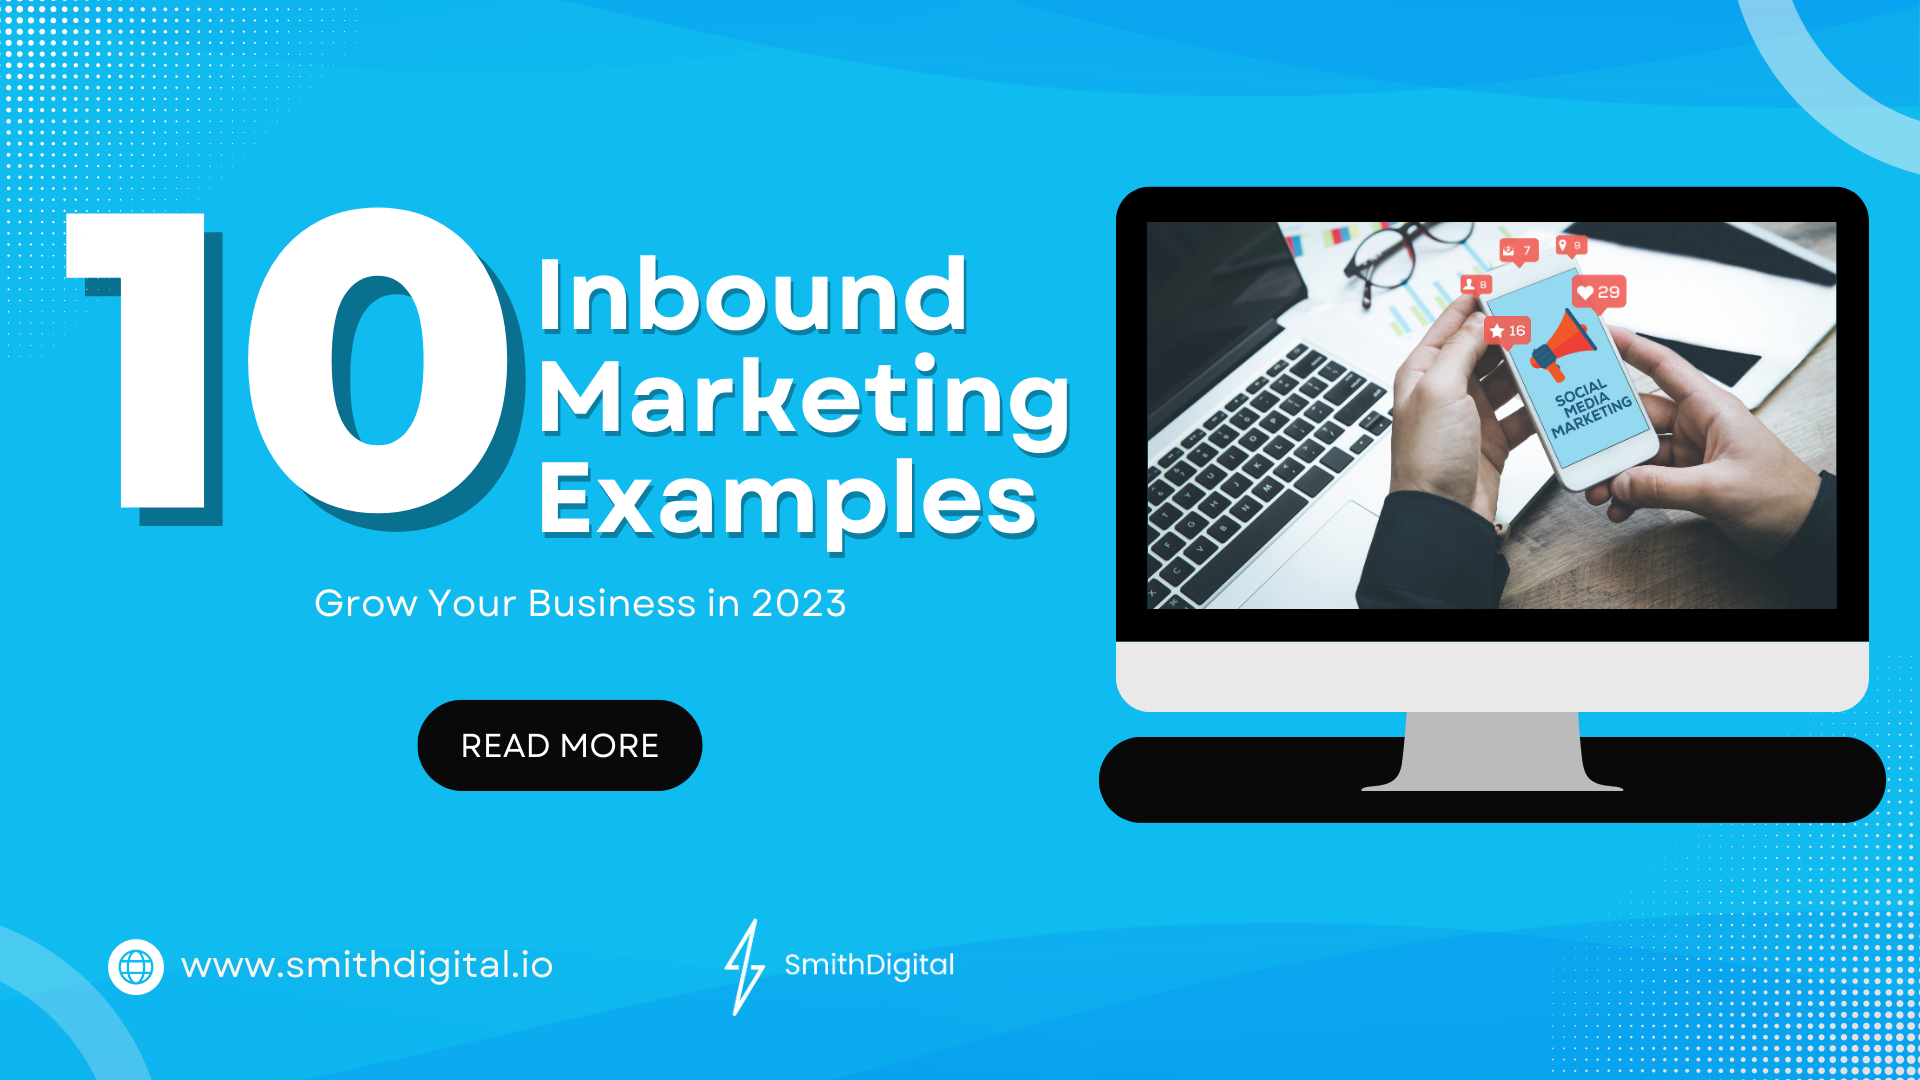 10 Inbound Marketing Examples That Will Grow Your Business in 2023